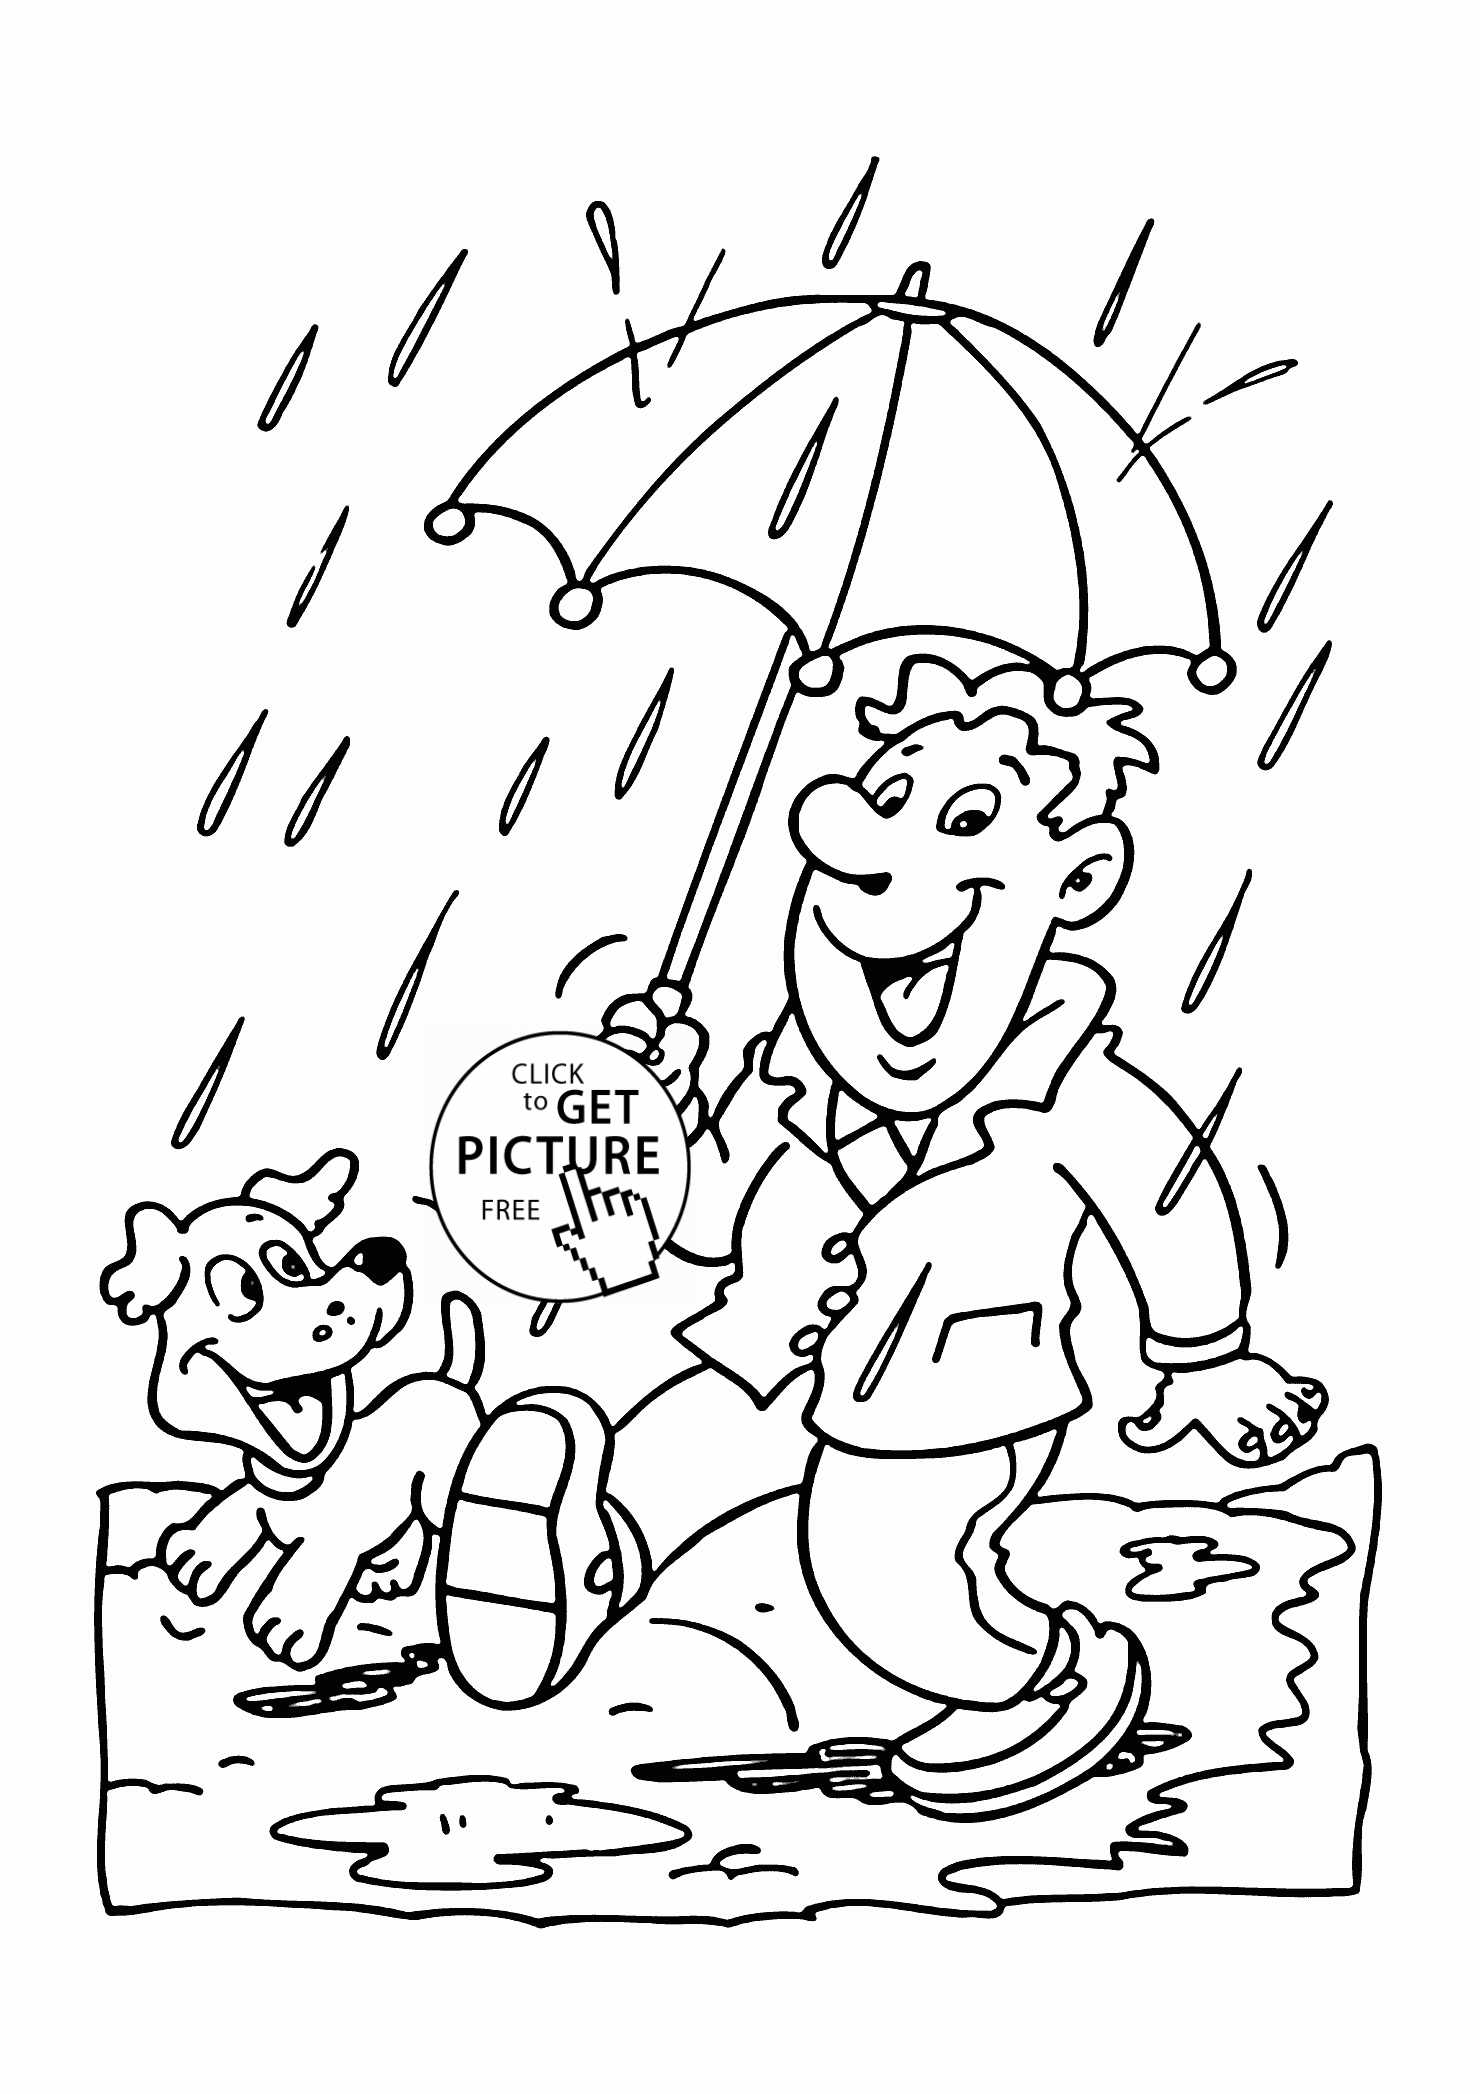 Fall Worksheets for Kindergarten and Fall Rain Coloring Pages for Kids Seasons Printables Free Wuppsy